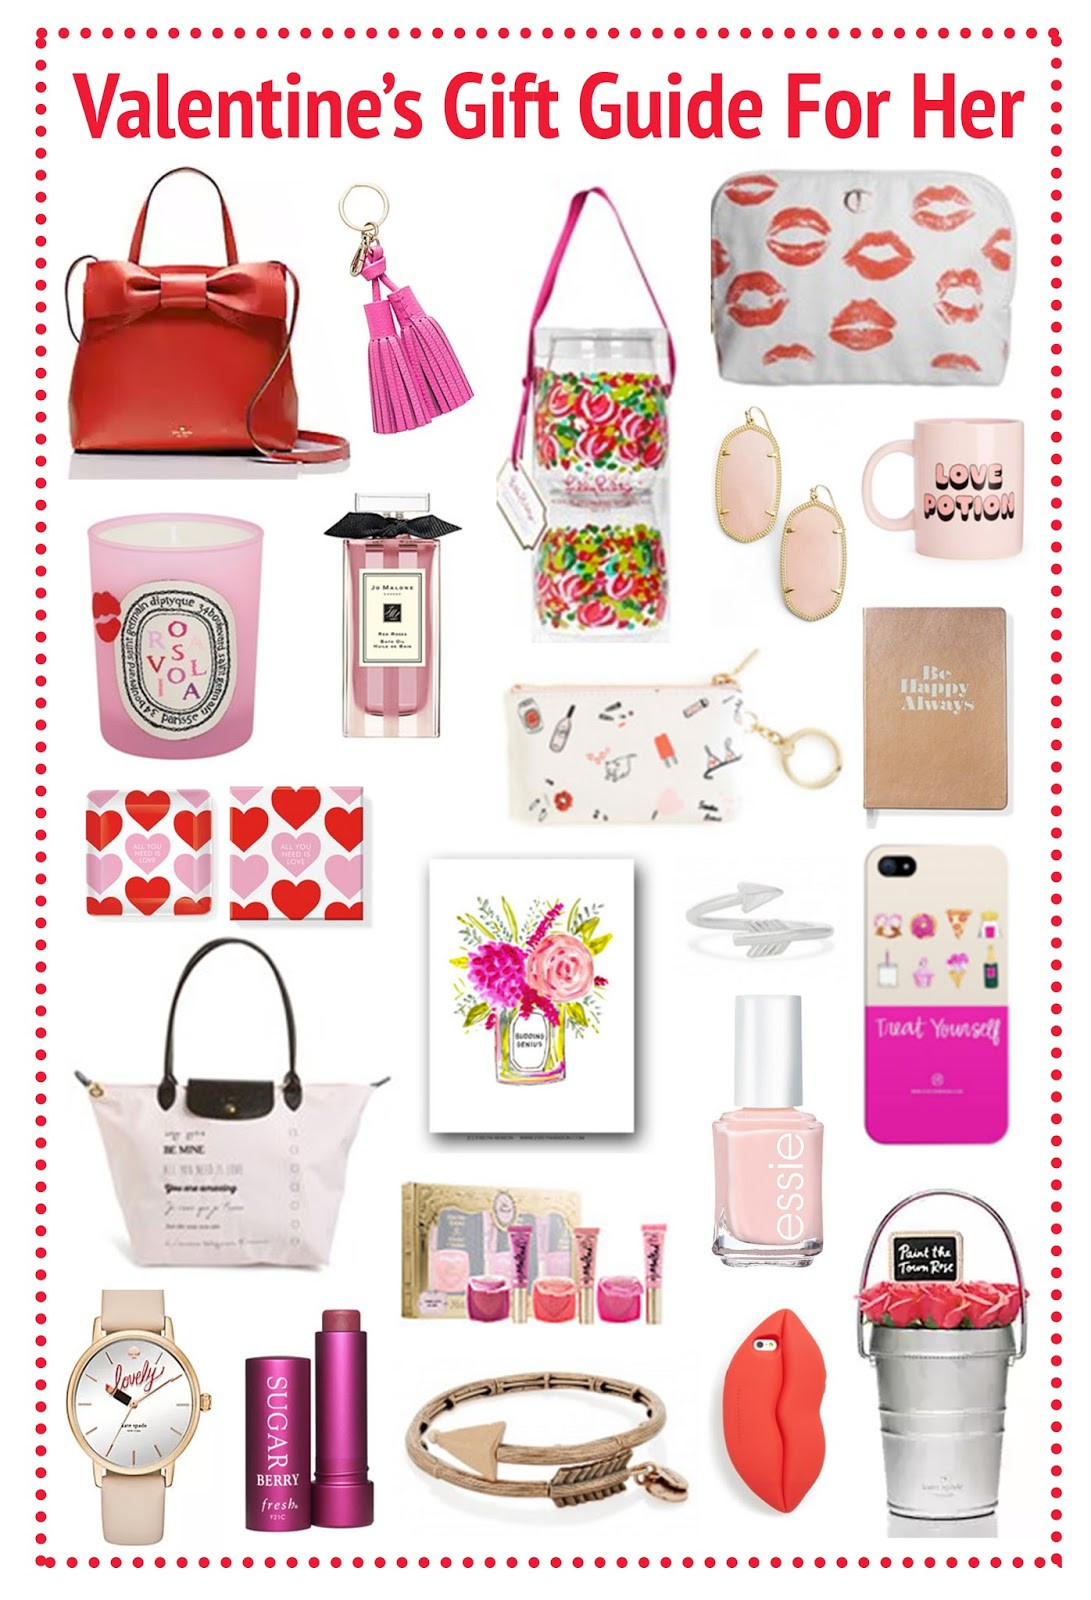 Cute Valentines Day Gifts For Her
 Sew Cute Valentines Day Gift Guide For Her